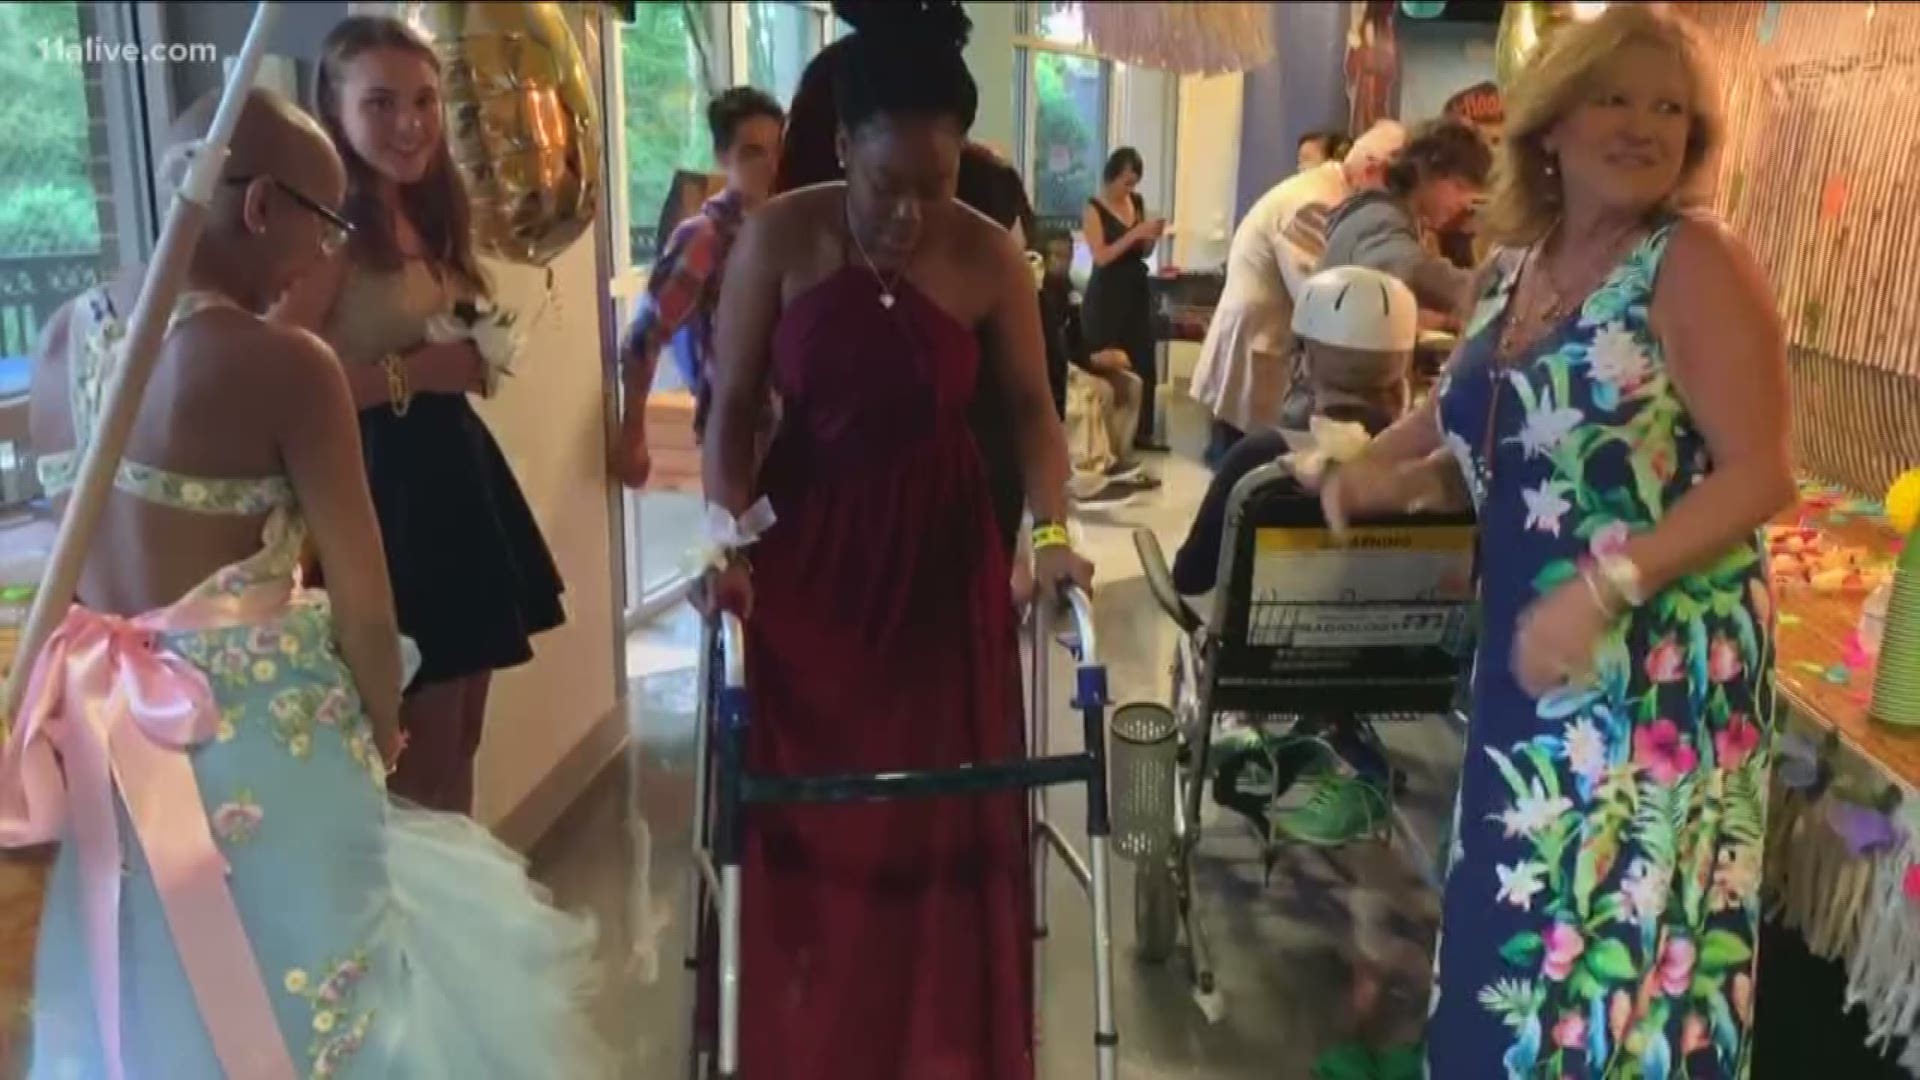 The patients at Children's Healthcare of Atlanta have all faced a lot of fears and been through a lot. It's why a special prom for the patients exists.